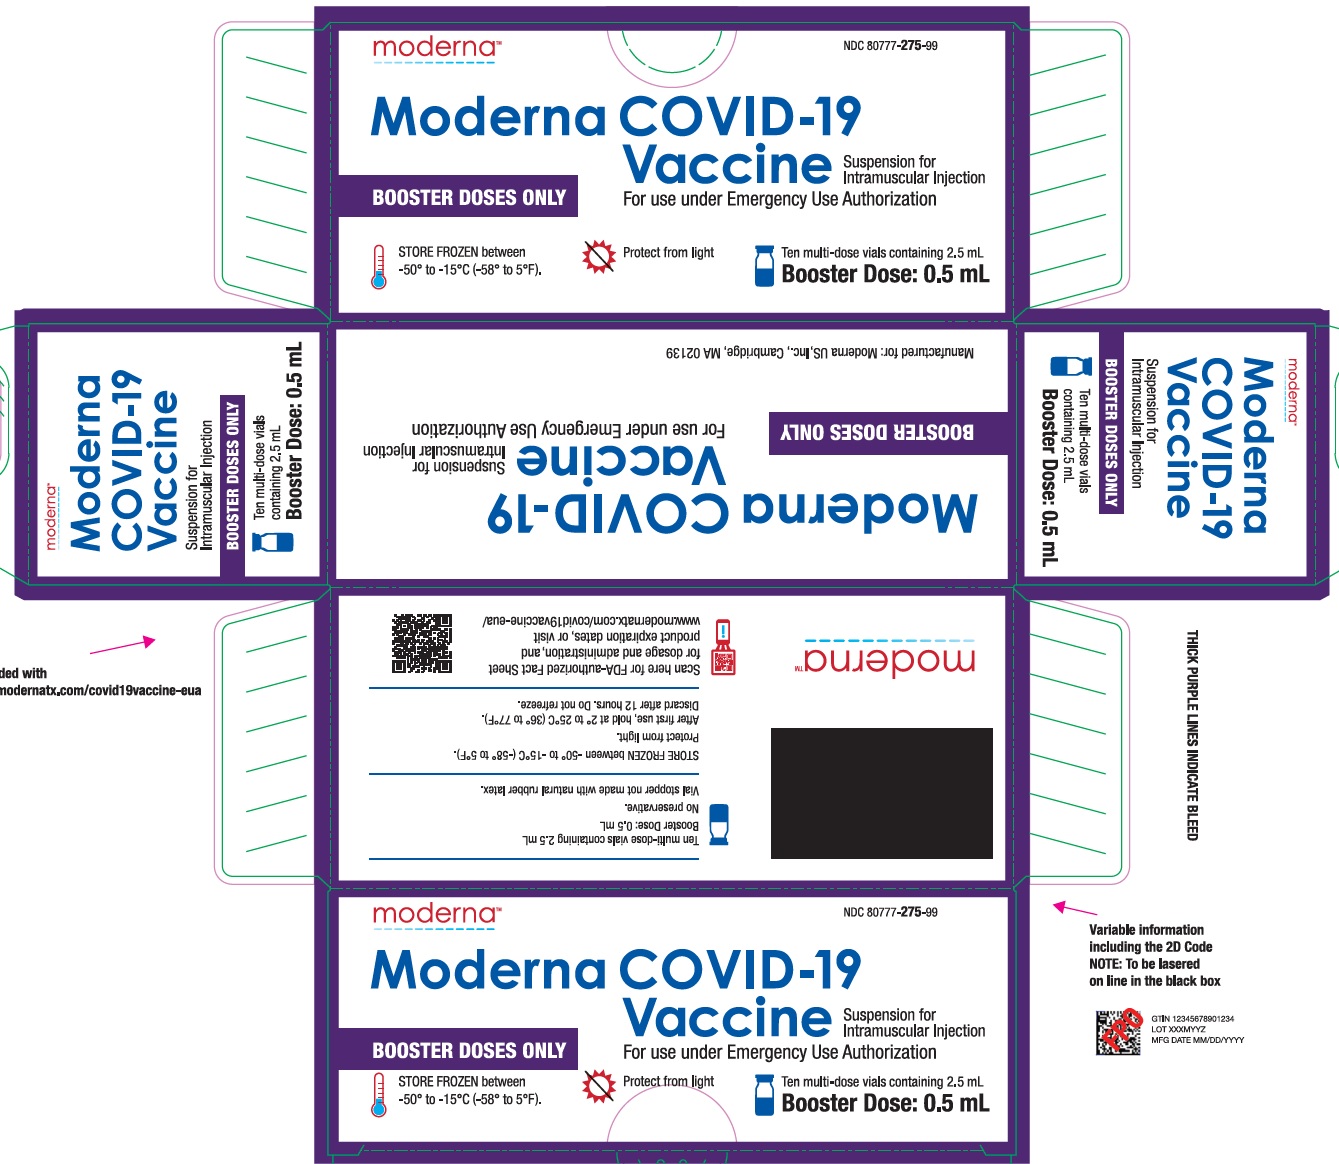 Moderna COVID-19 Vaccine Suspension for Intramuscular Injection for use under Emergency Use Authorization-Booster Doses Only-2.5 mL Carton